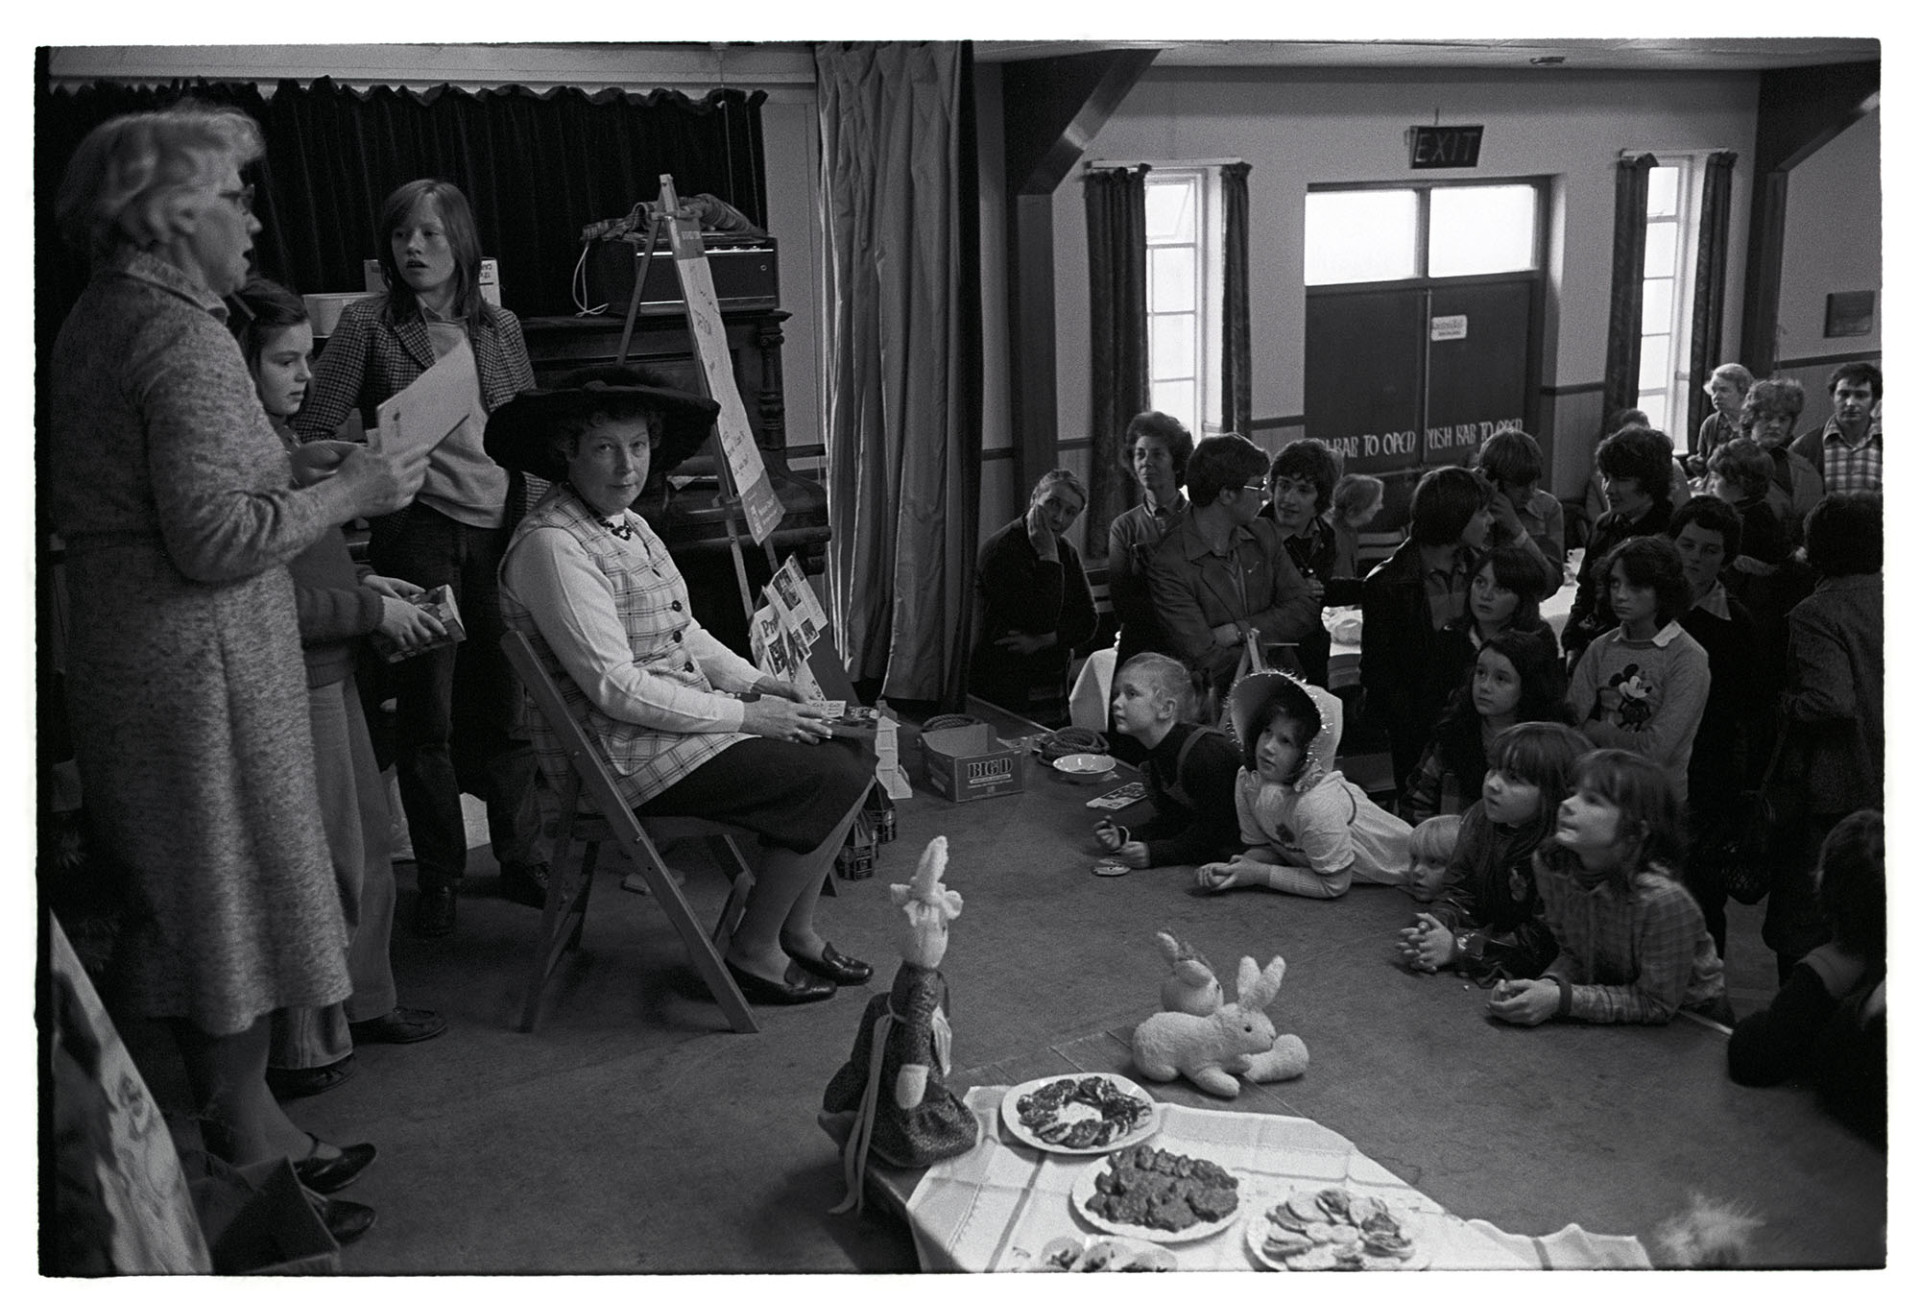 Easter party, in village hall the Easter bonnet bunnies, rabbits, hats. 
[Ethel Turner sat down in front of a group of children at an Easter party in Dolton Village Hall. Another woman is talking to the children. Toy rabbits and party food laid on a table is in front of the children.]